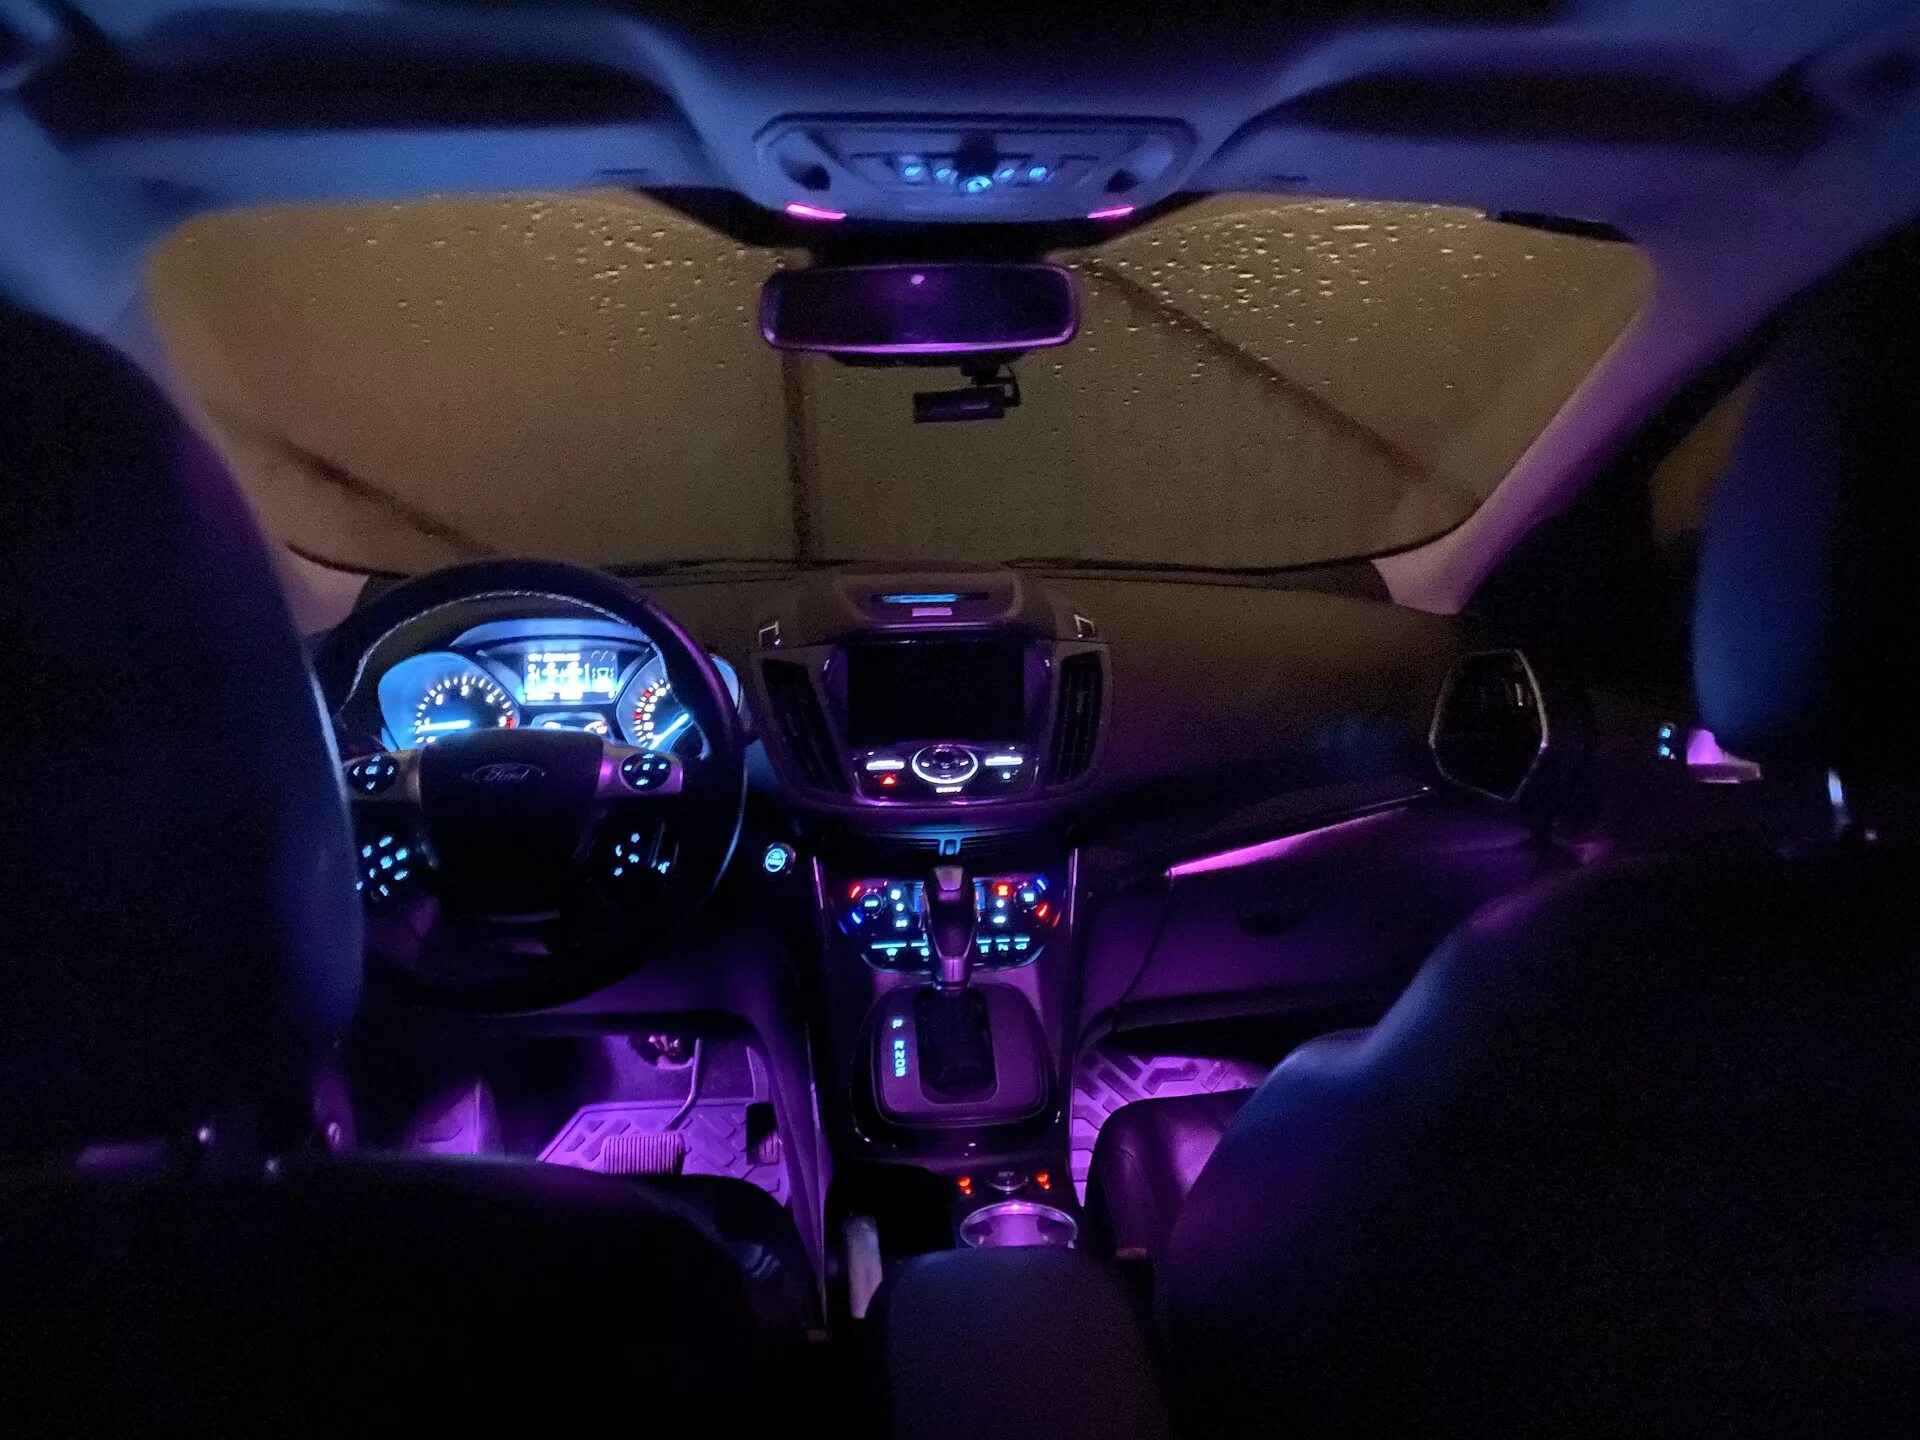 Свет форд куга. Ambient Light Ford Focus 2. Подсветка салона Ford Kuga 2. Подсветка салона Форд фокус 3 Титаниум. Подсветка салона Форд фокус 2 Рестайлинг.